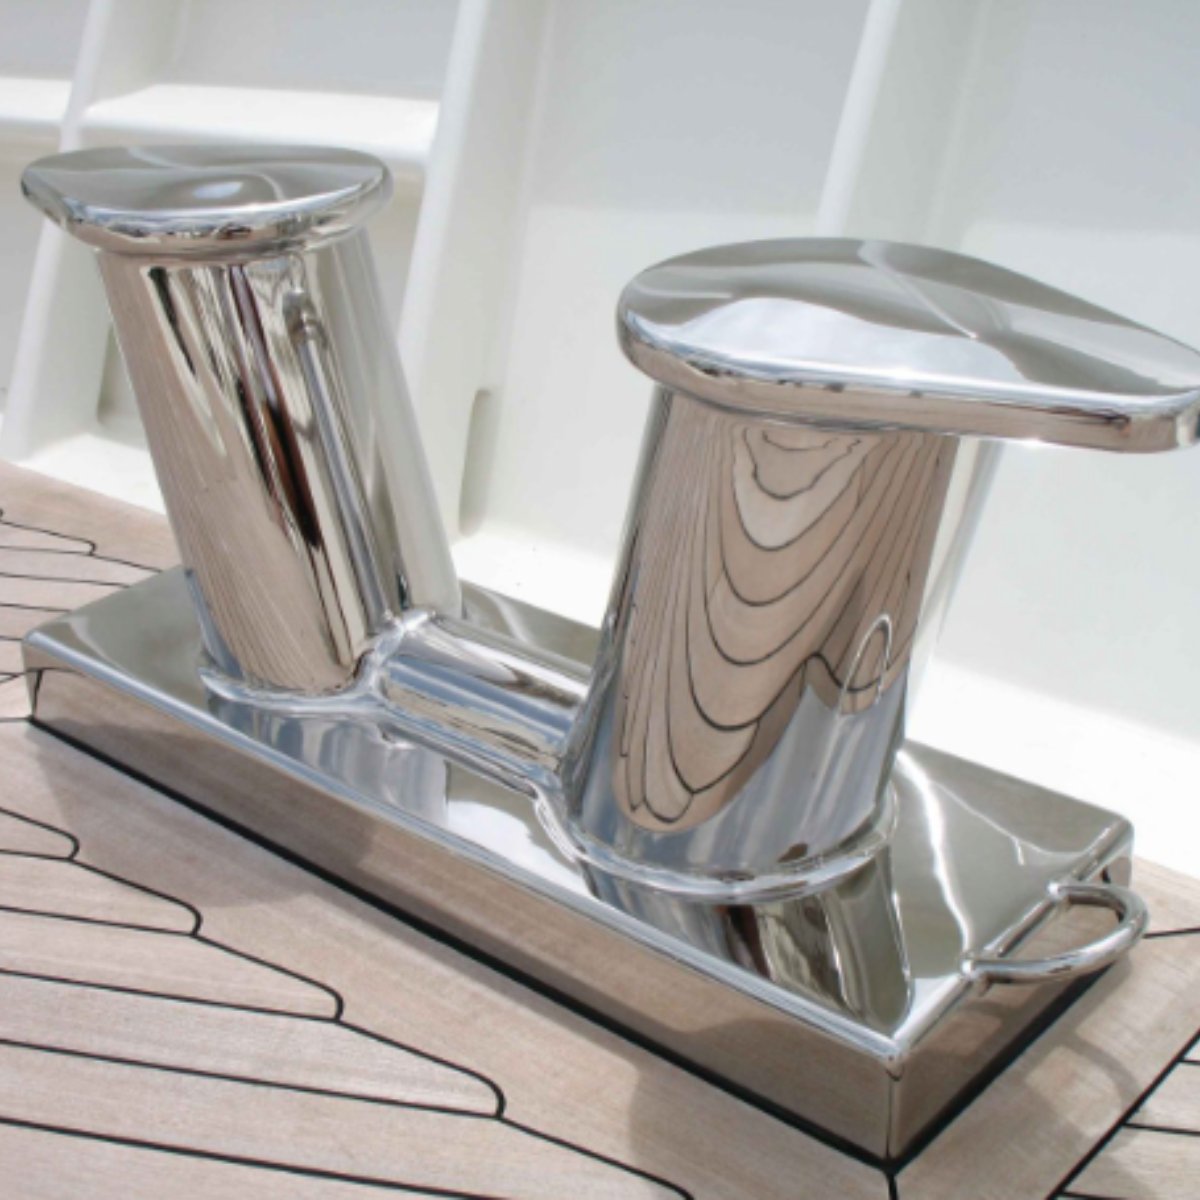 We can cut, bend, roll and weld all types of stainless steel, aluminium, and mild steel to create different parts for yachts, including deck fittings, mast fittings, stanchions, handrails and boarding ladders.

bit.ly/41OEv8Q

#yachtrefit #superyachtrefit #yachtcharter